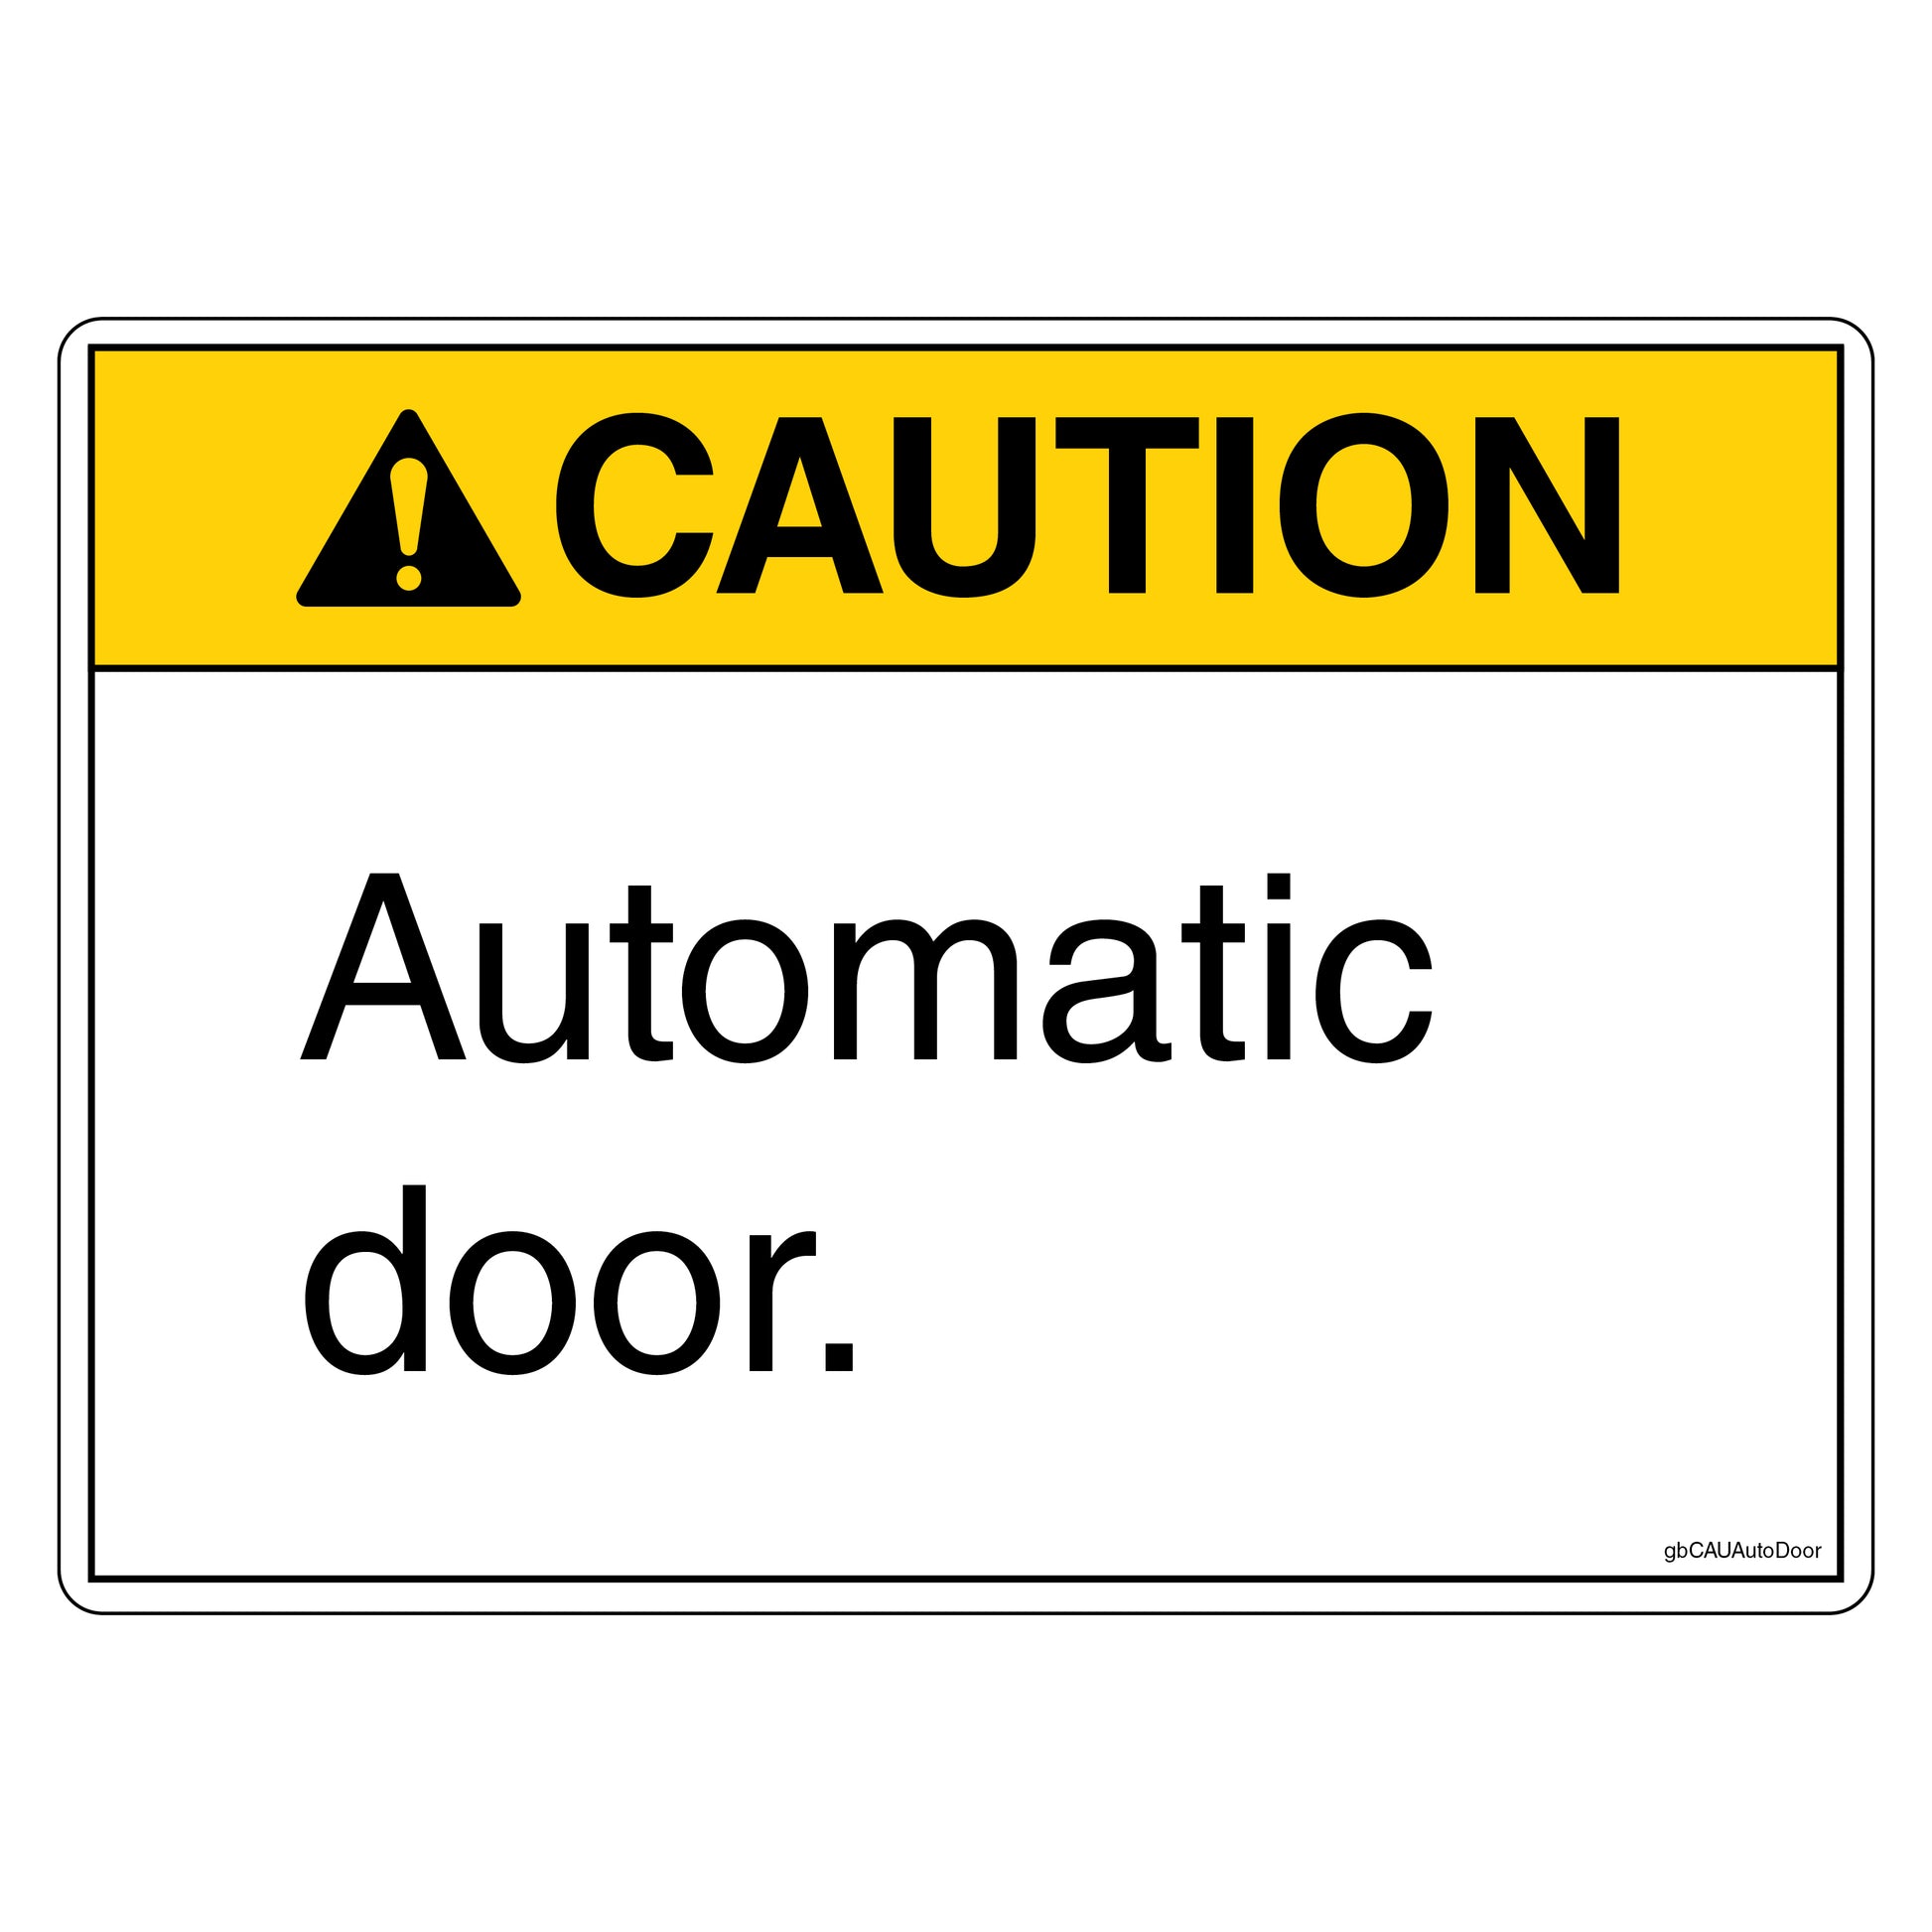 Caution Automatic Door Decal. 4 inches by 3 inches in size.